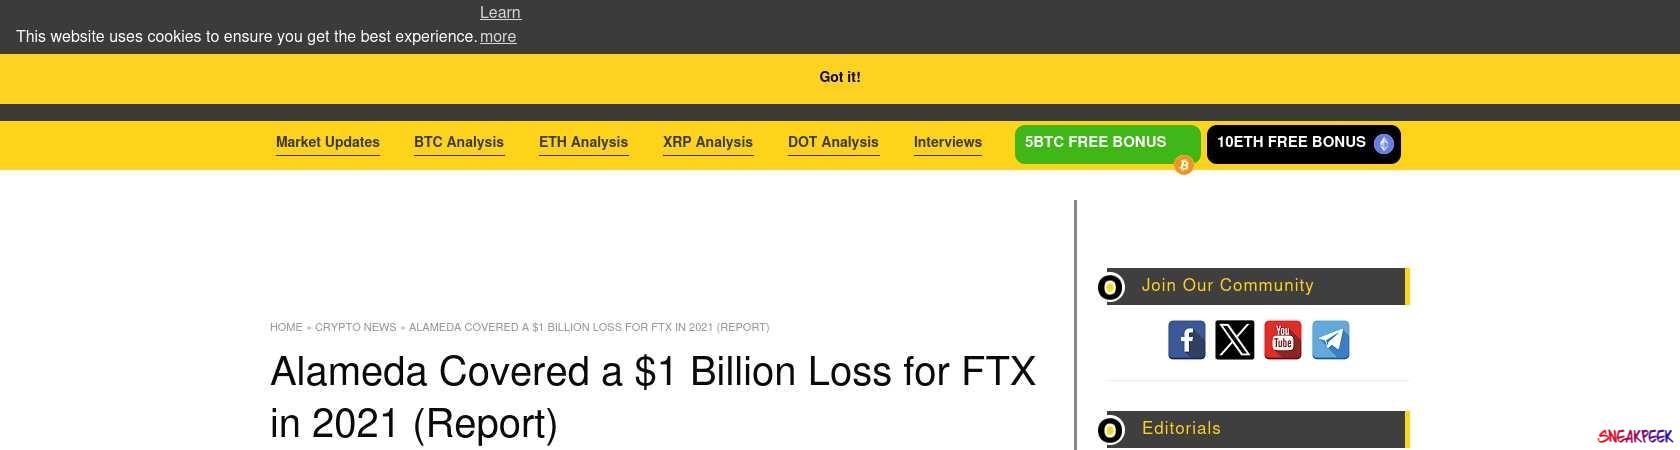 Read the full Article:  ⭲ Alameda Covered a $1 Billion Loss for FTX in 2021 (Report)